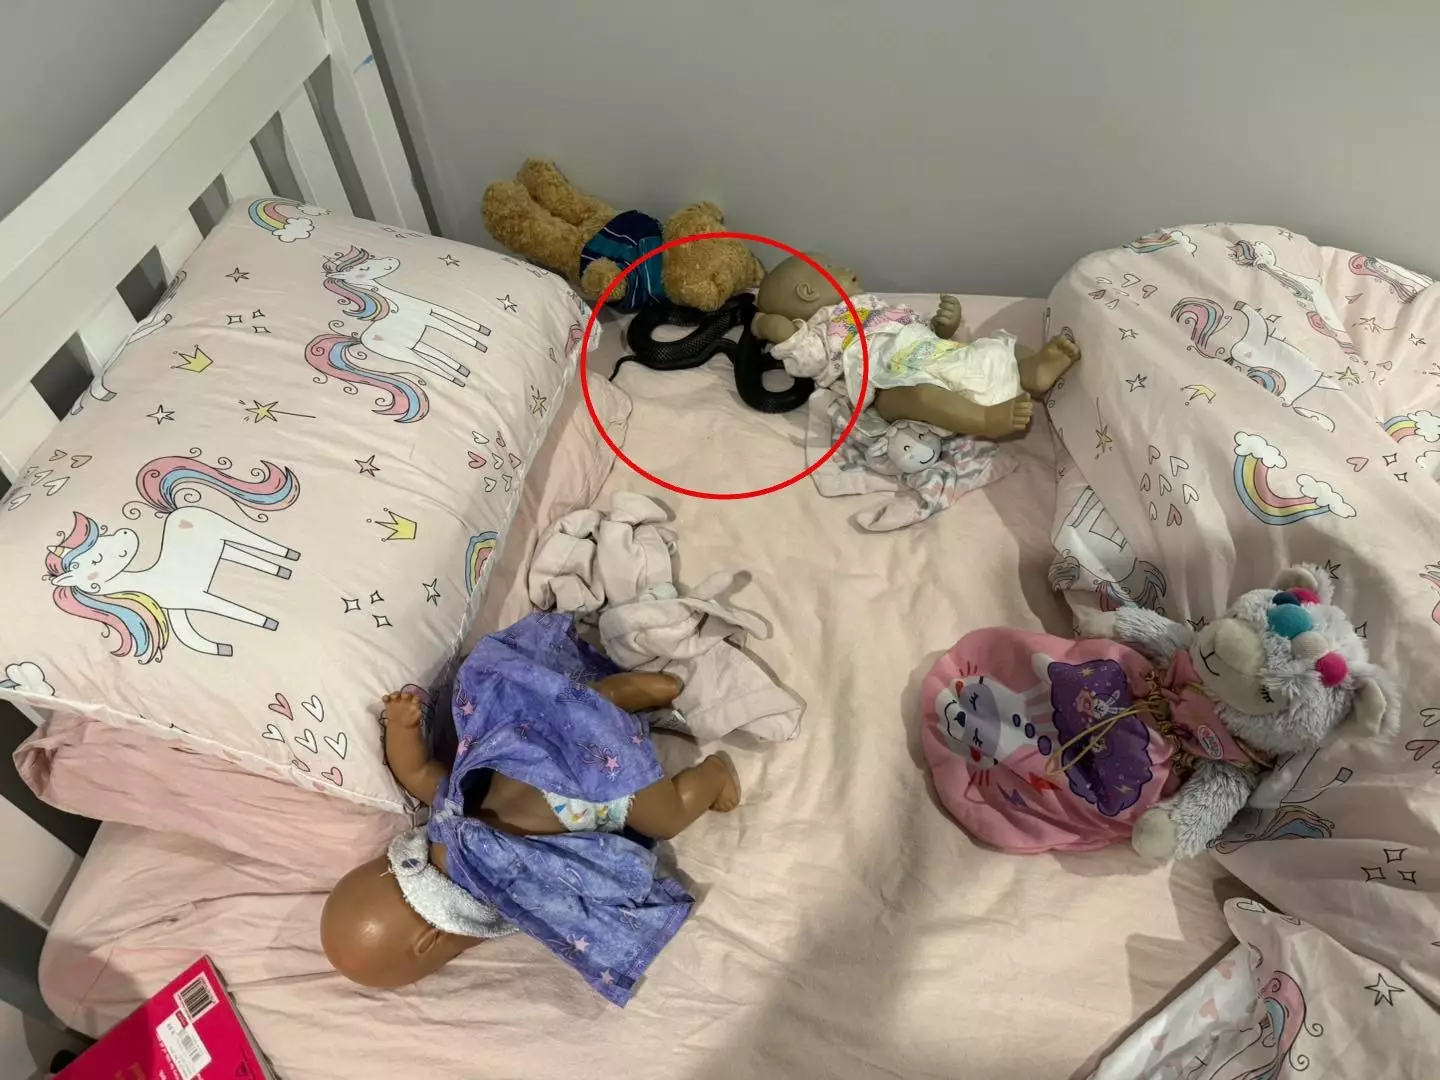 The snake was found hiding in the young girl's bed. (Snake Catchers Brisbane & Gold Coast/Facebook)